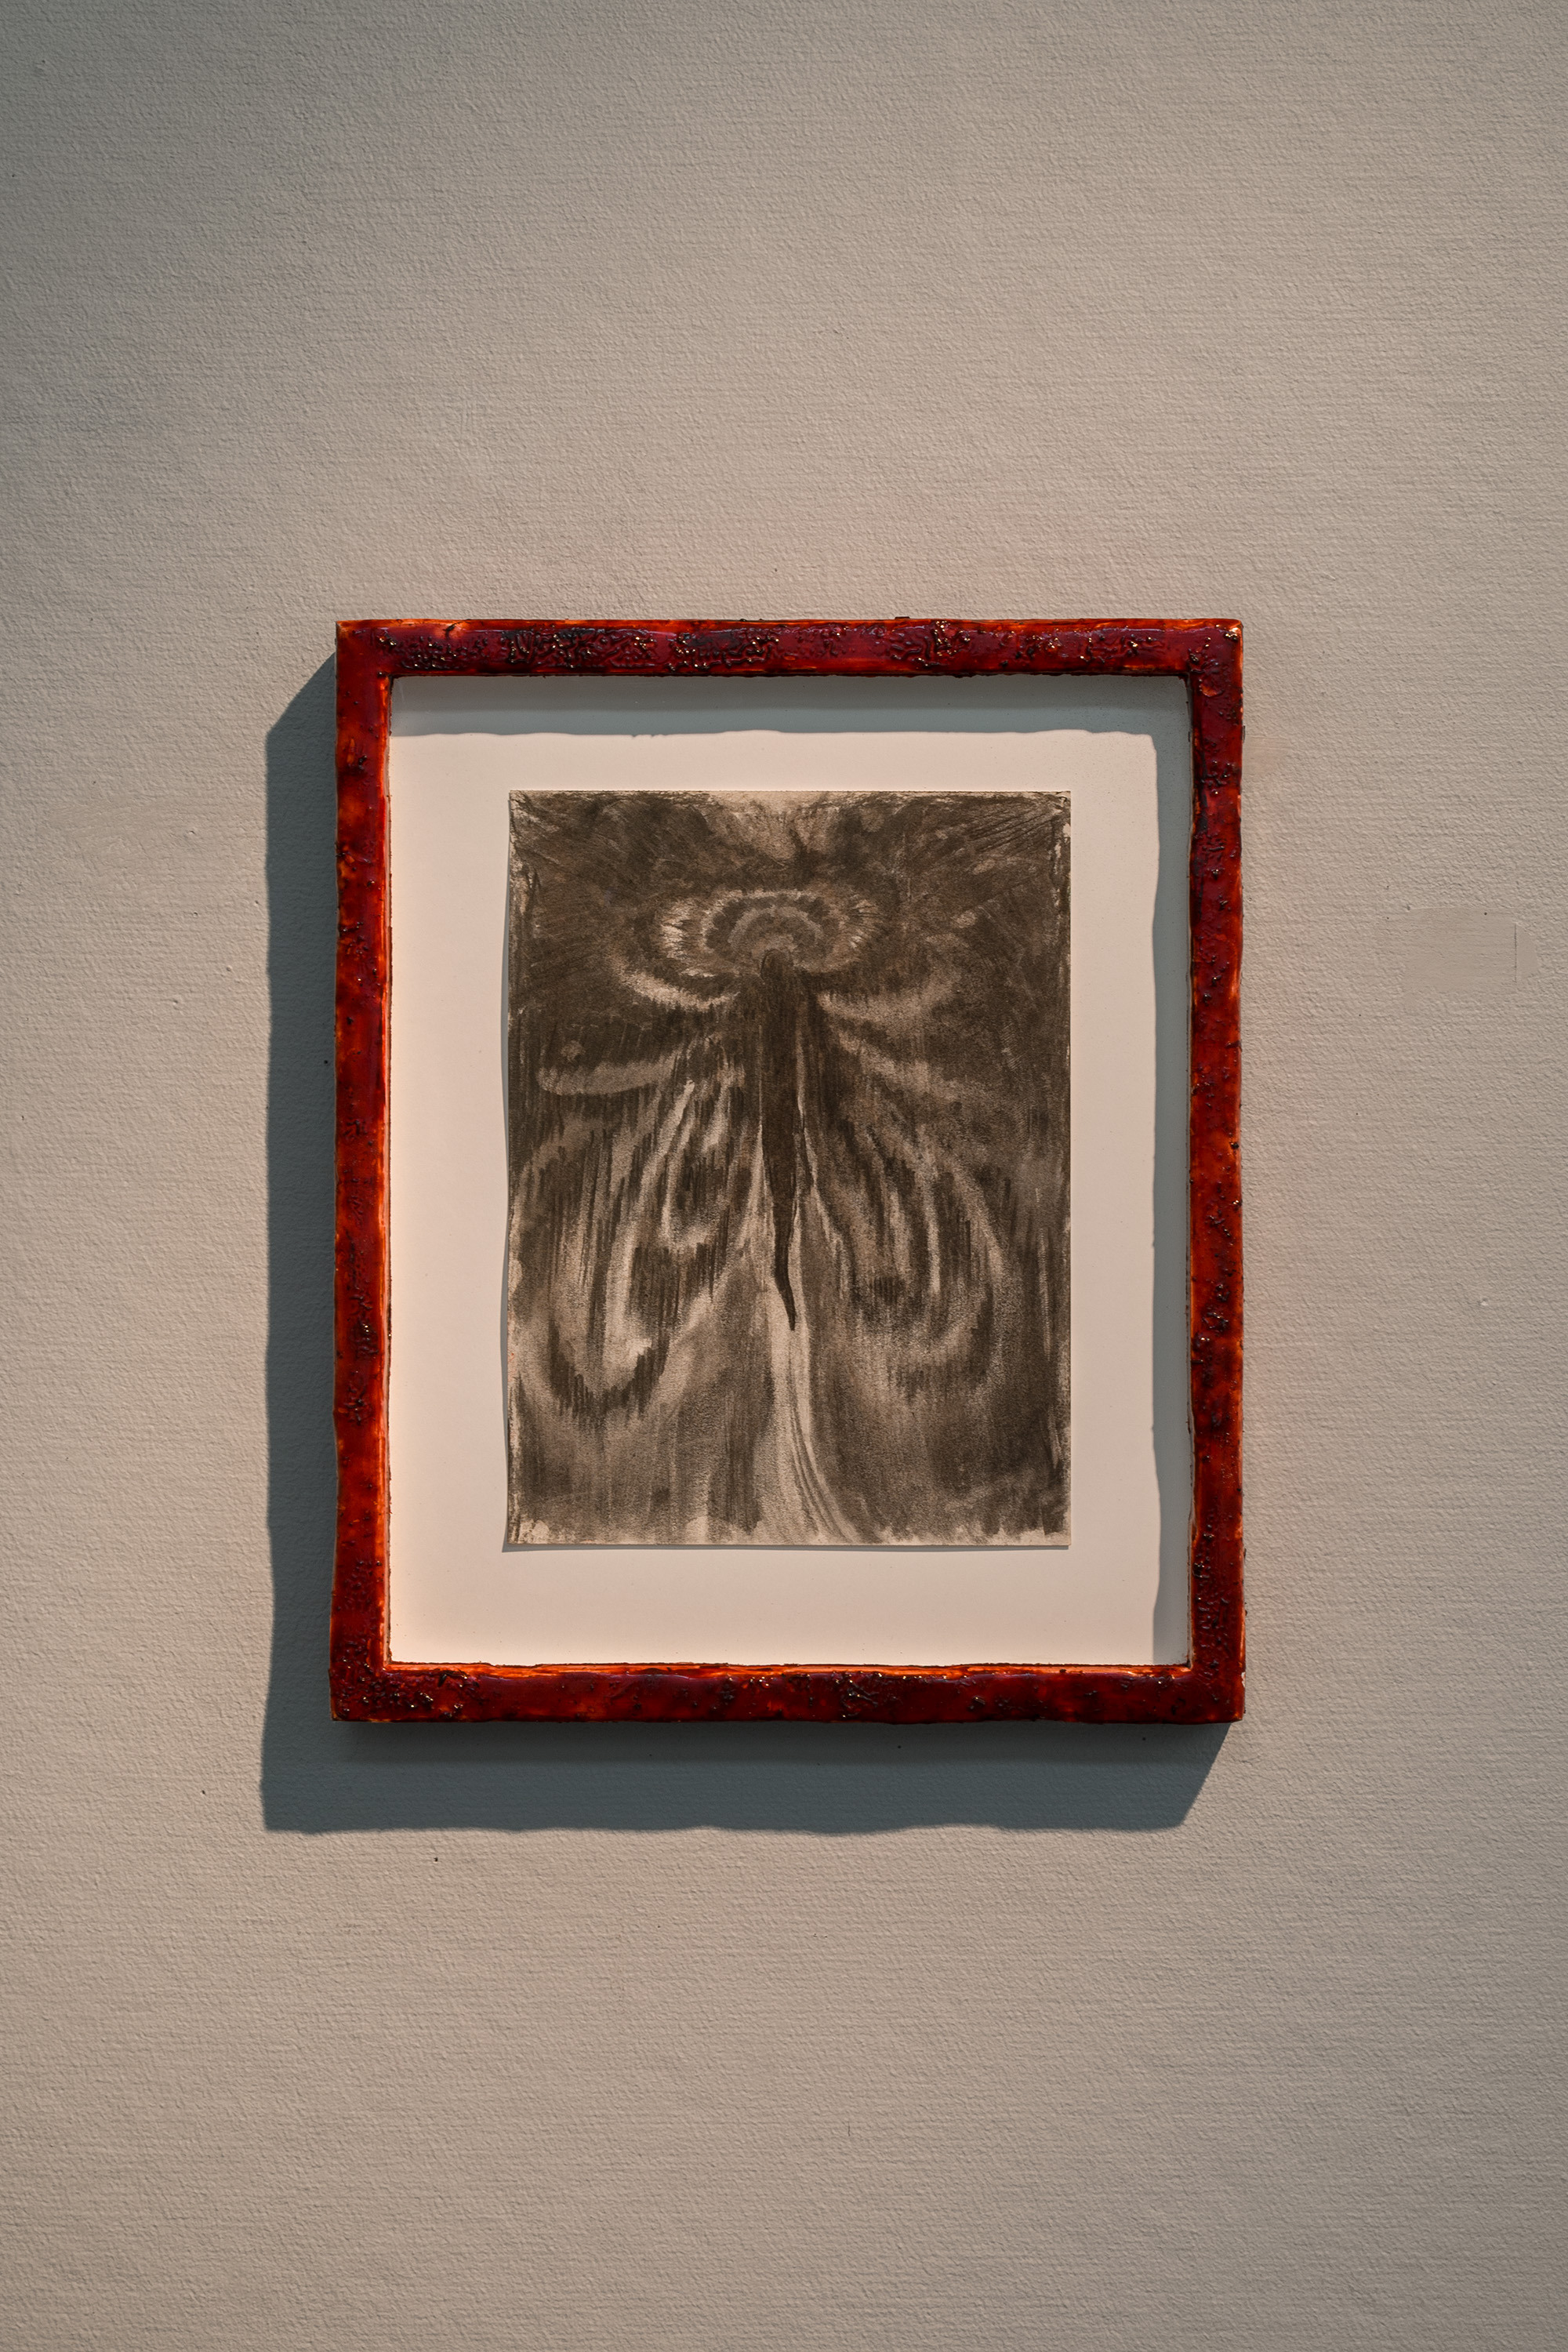 Julia Selin, Follow a bug to the end of the world, charcoal on paper, oil on pine frame, 2022 